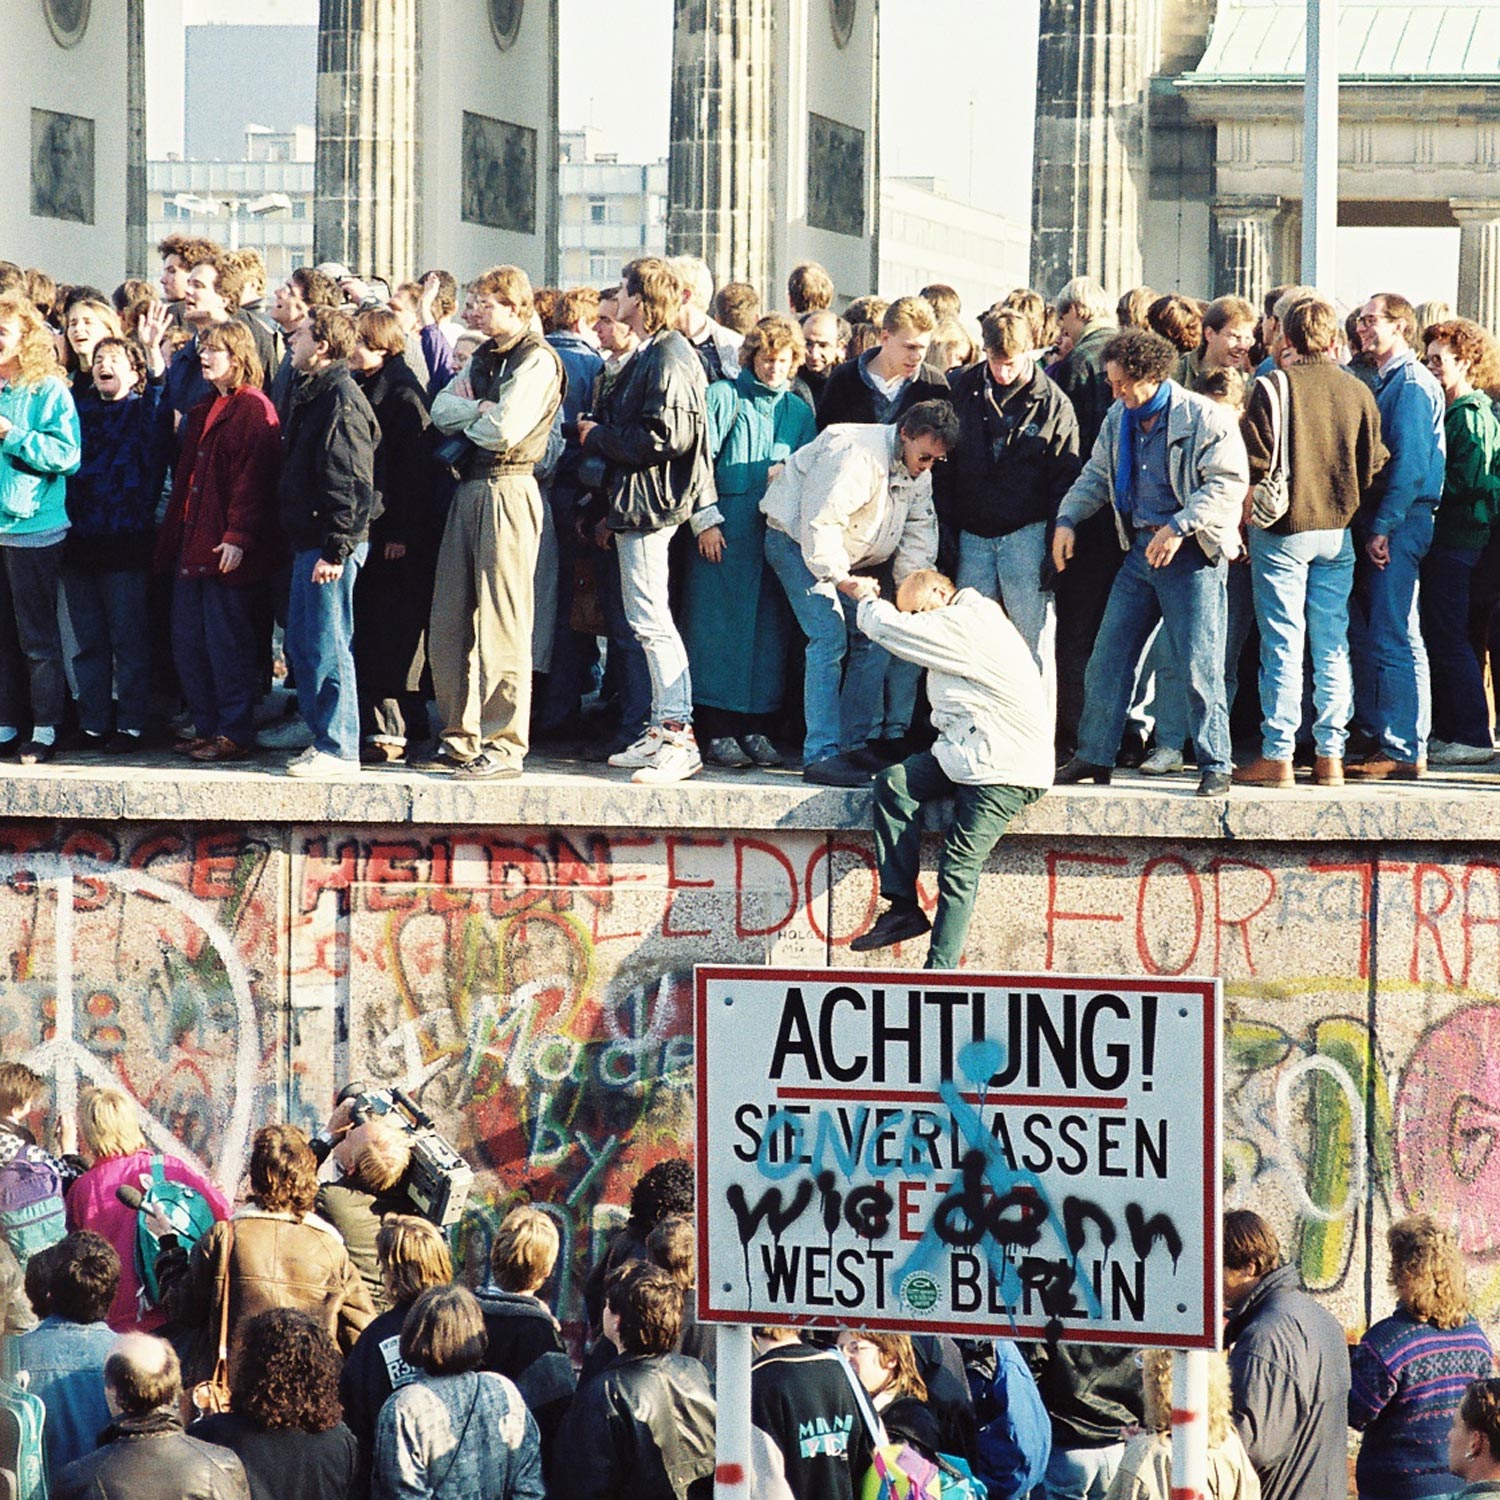 In 1990, as West German Interior Minister, Schäuble negotiated the treaty that brought West and East Germany together. © Sue Ream / Wikimedia Commons